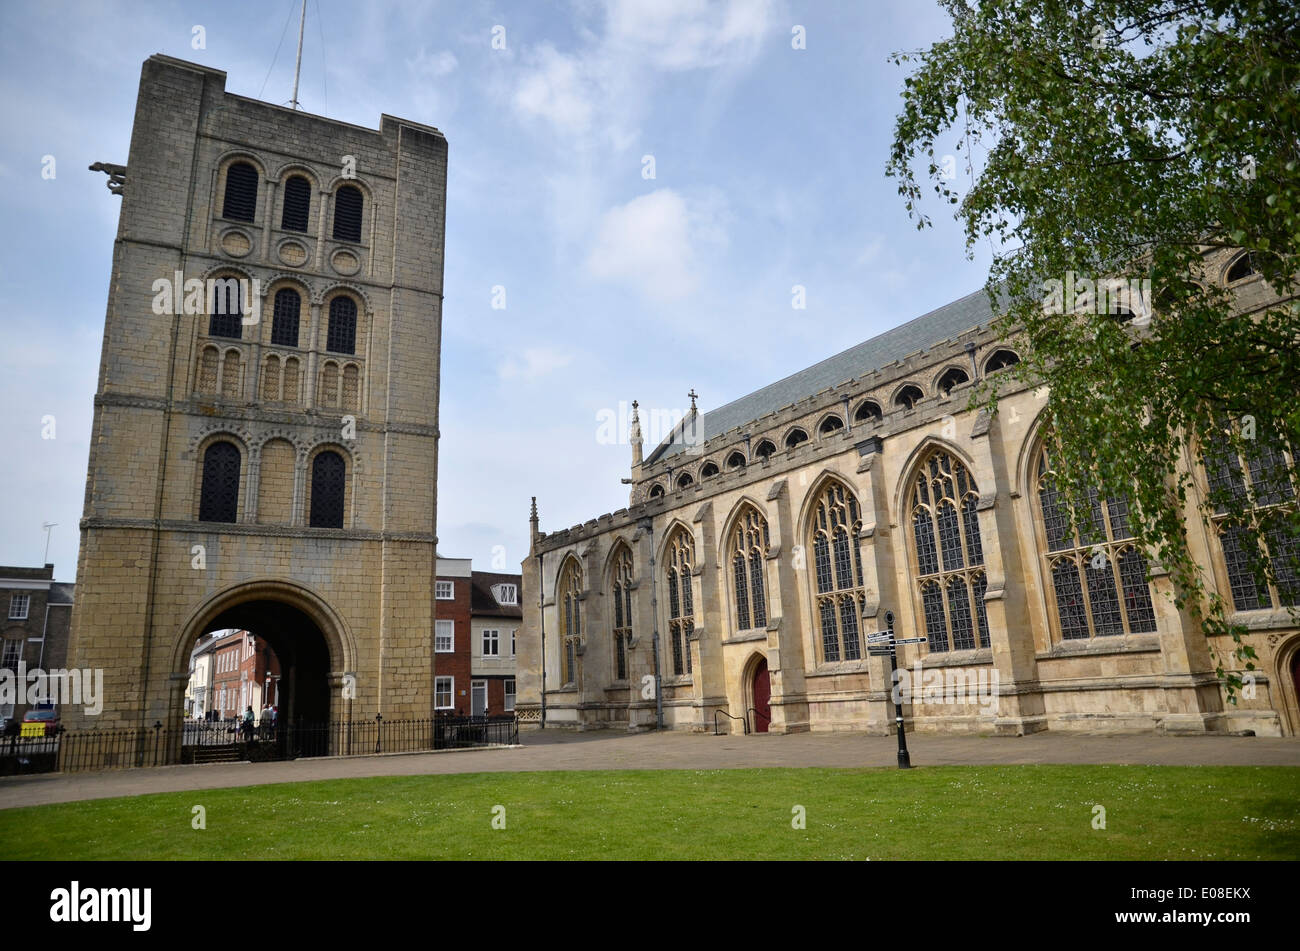 La Torre normanna e St Edmundsbury Cathedral in Bury St Edmunds, Suffolk, Inghilterra Foto Stock